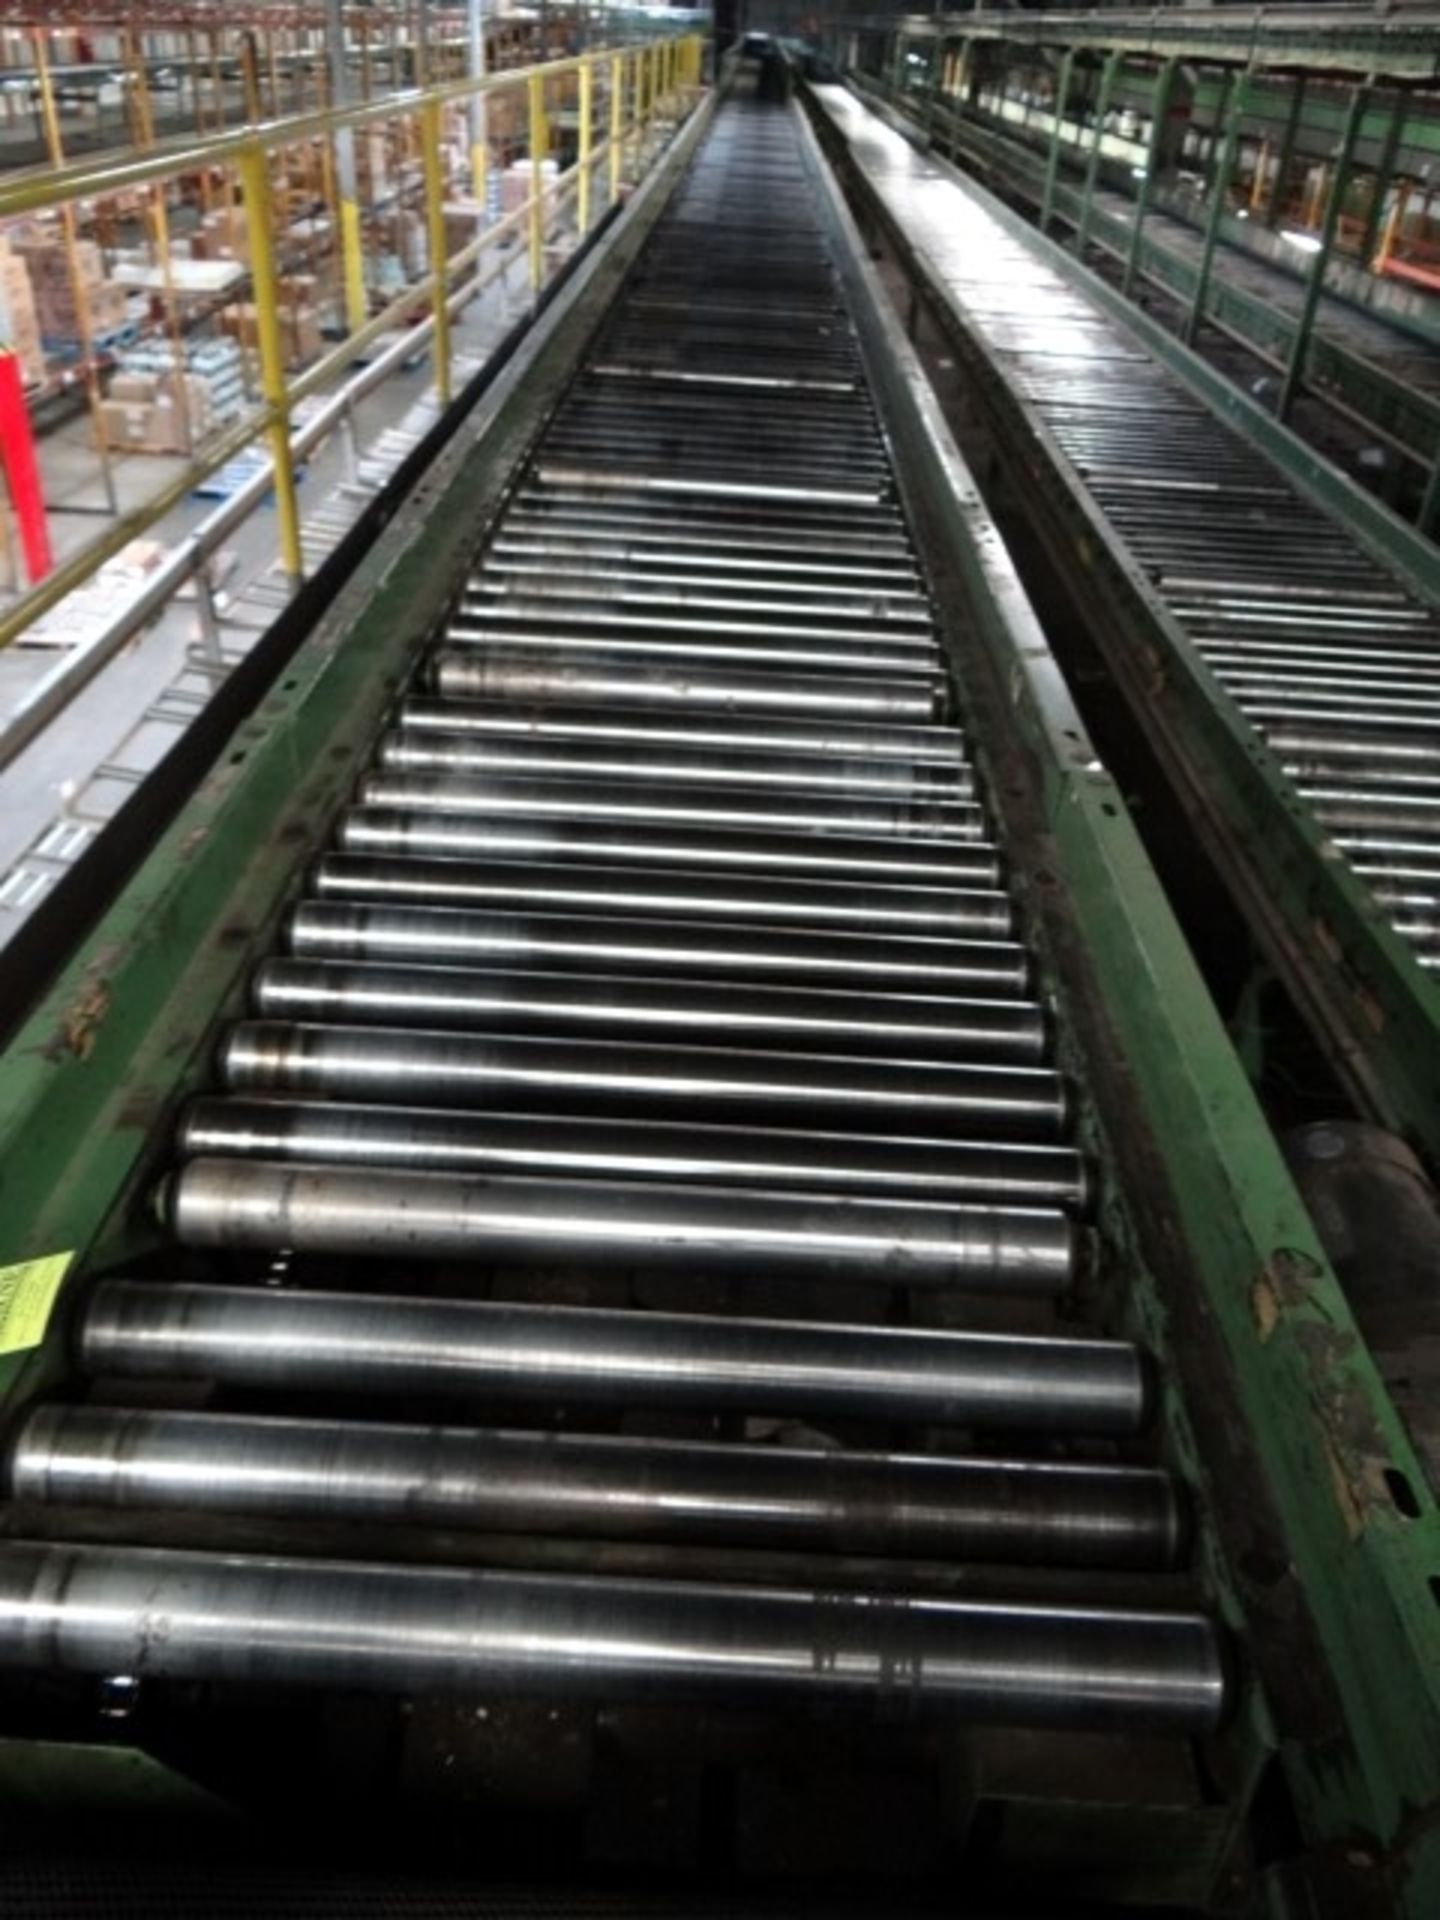 Approximately 470' of Roller Conveyor